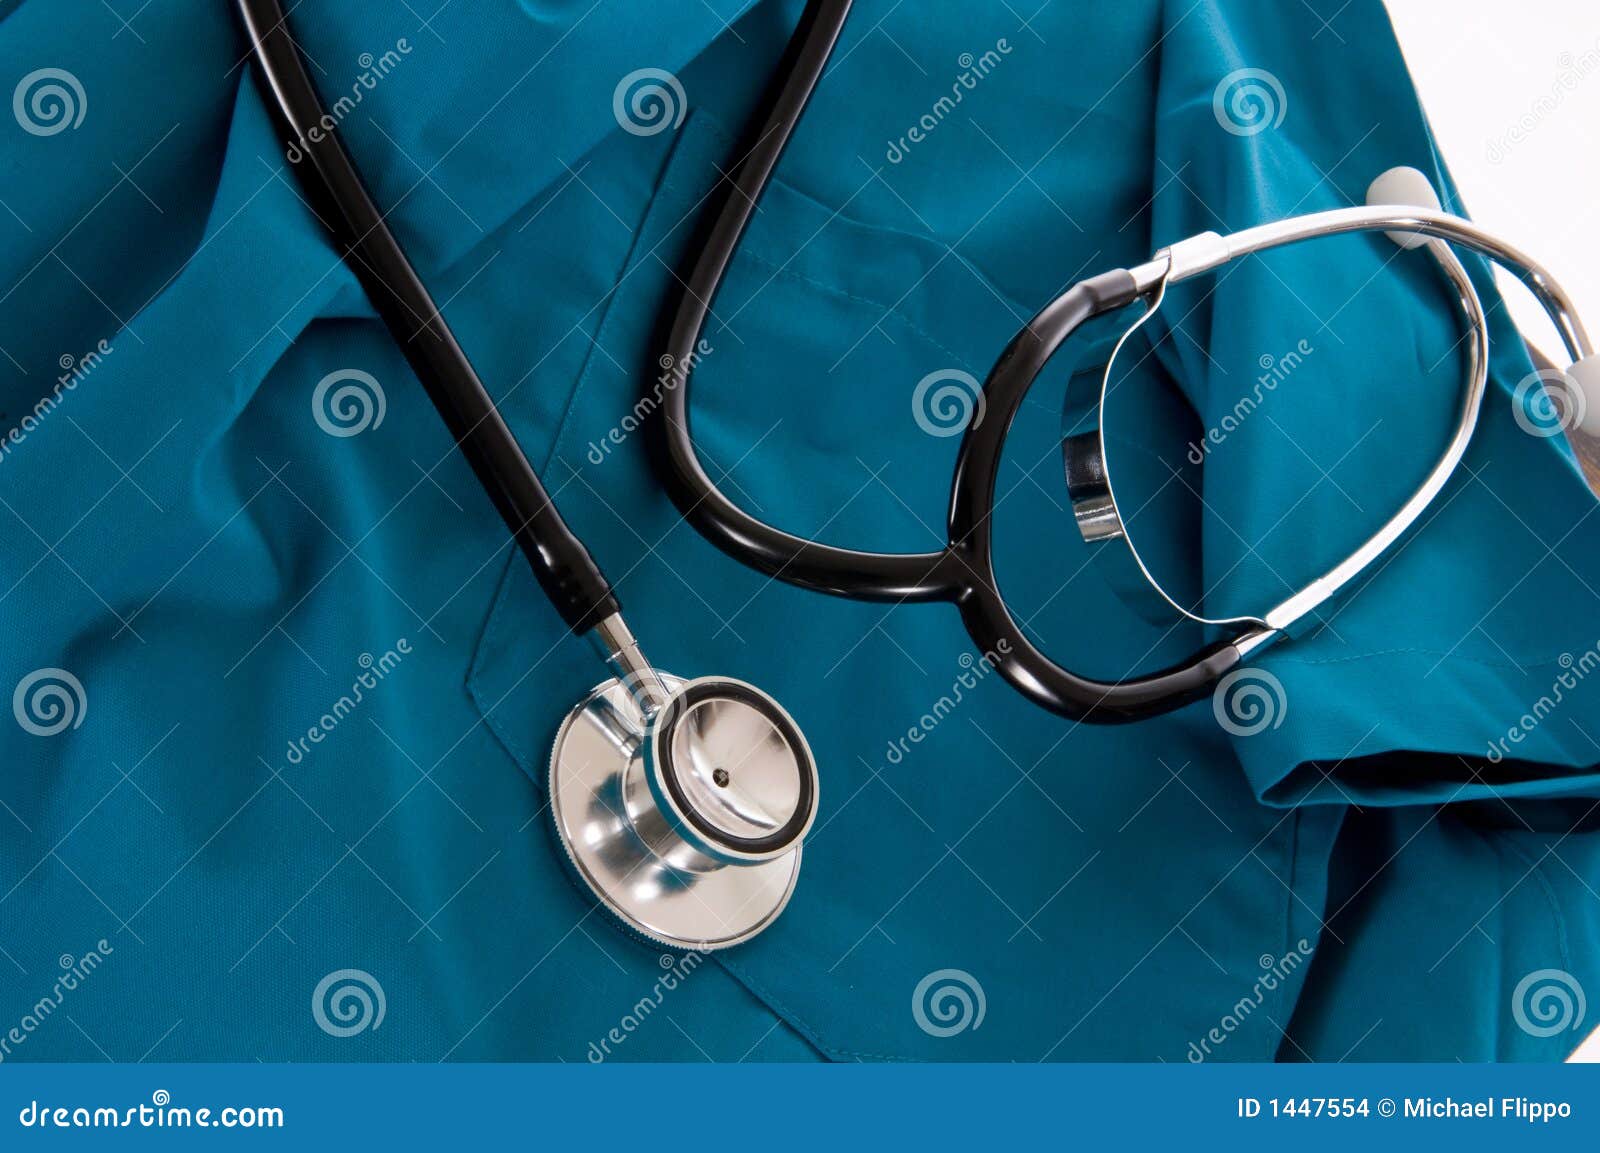 stethoscope and scrubs on white background